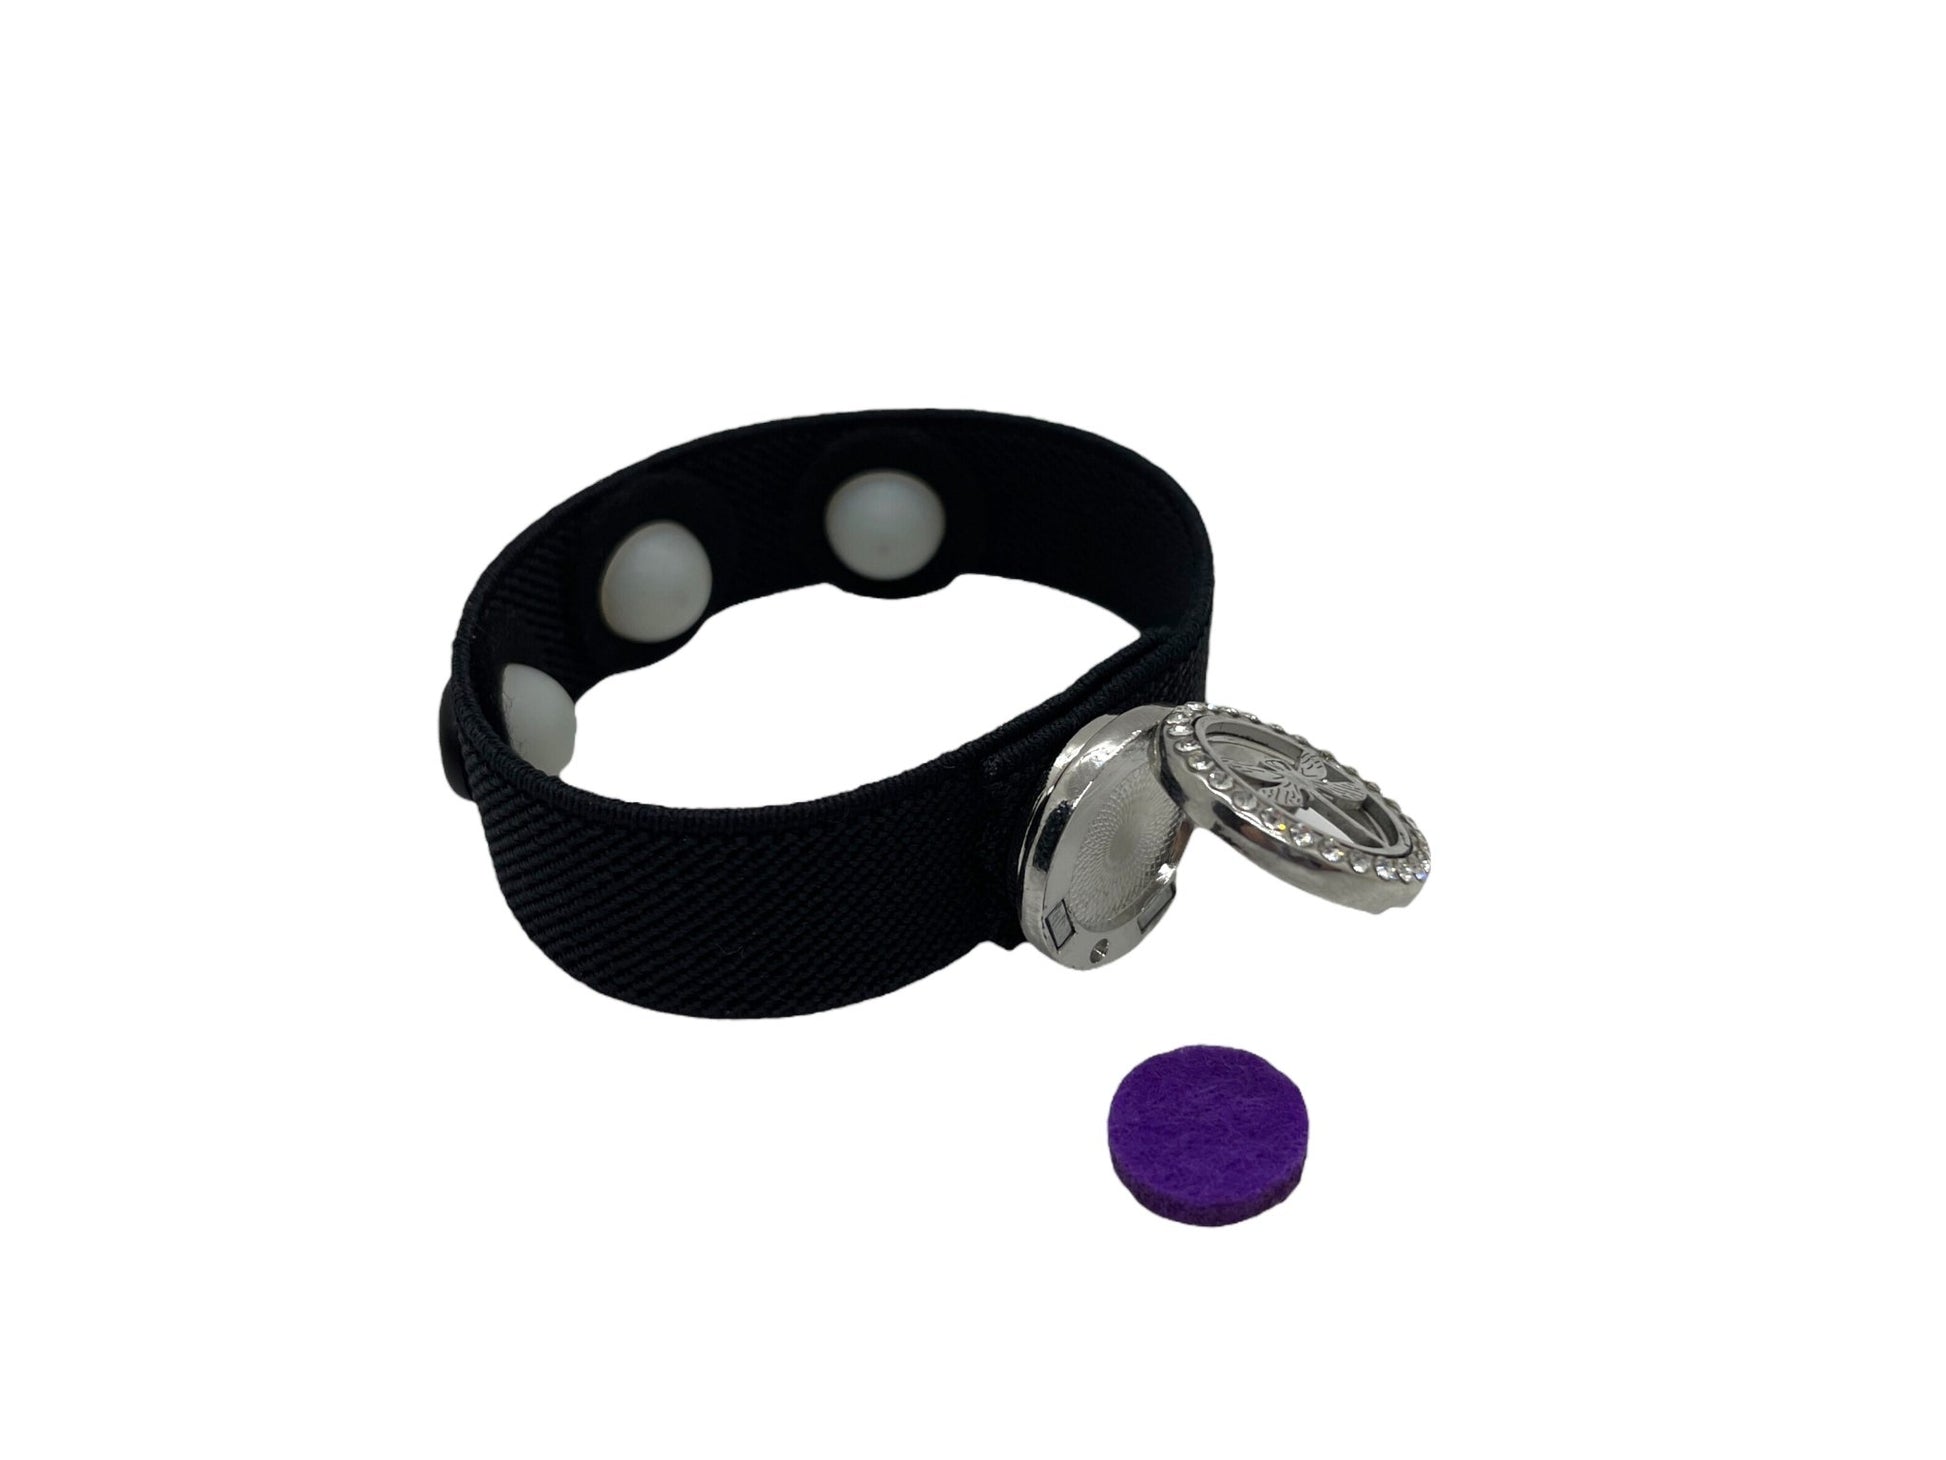 Menopause Relief Snap Charm Diffuser Bracelet-Clary Sage Scented-Reduces Hot Flashes, Anxiety-Multi Symptom Acupressure Band-Mood Support-Emotional Balance-Snap Locket Diffuser - Acupressure Bracelets